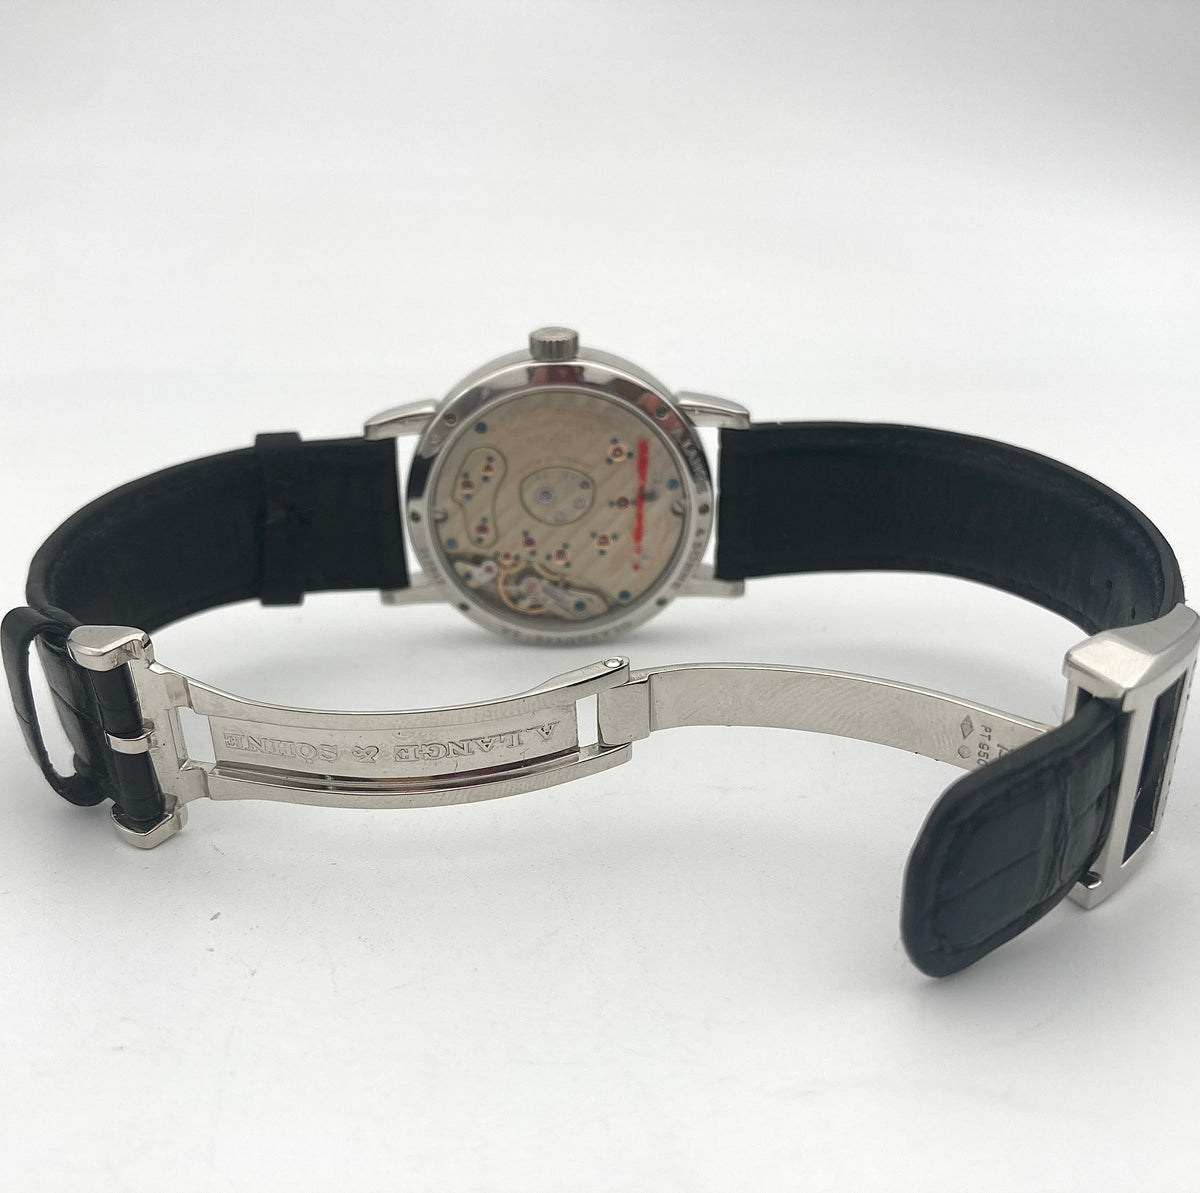 Preowned Luxury Watches Ireland Alange and Sohne Preowned Watches